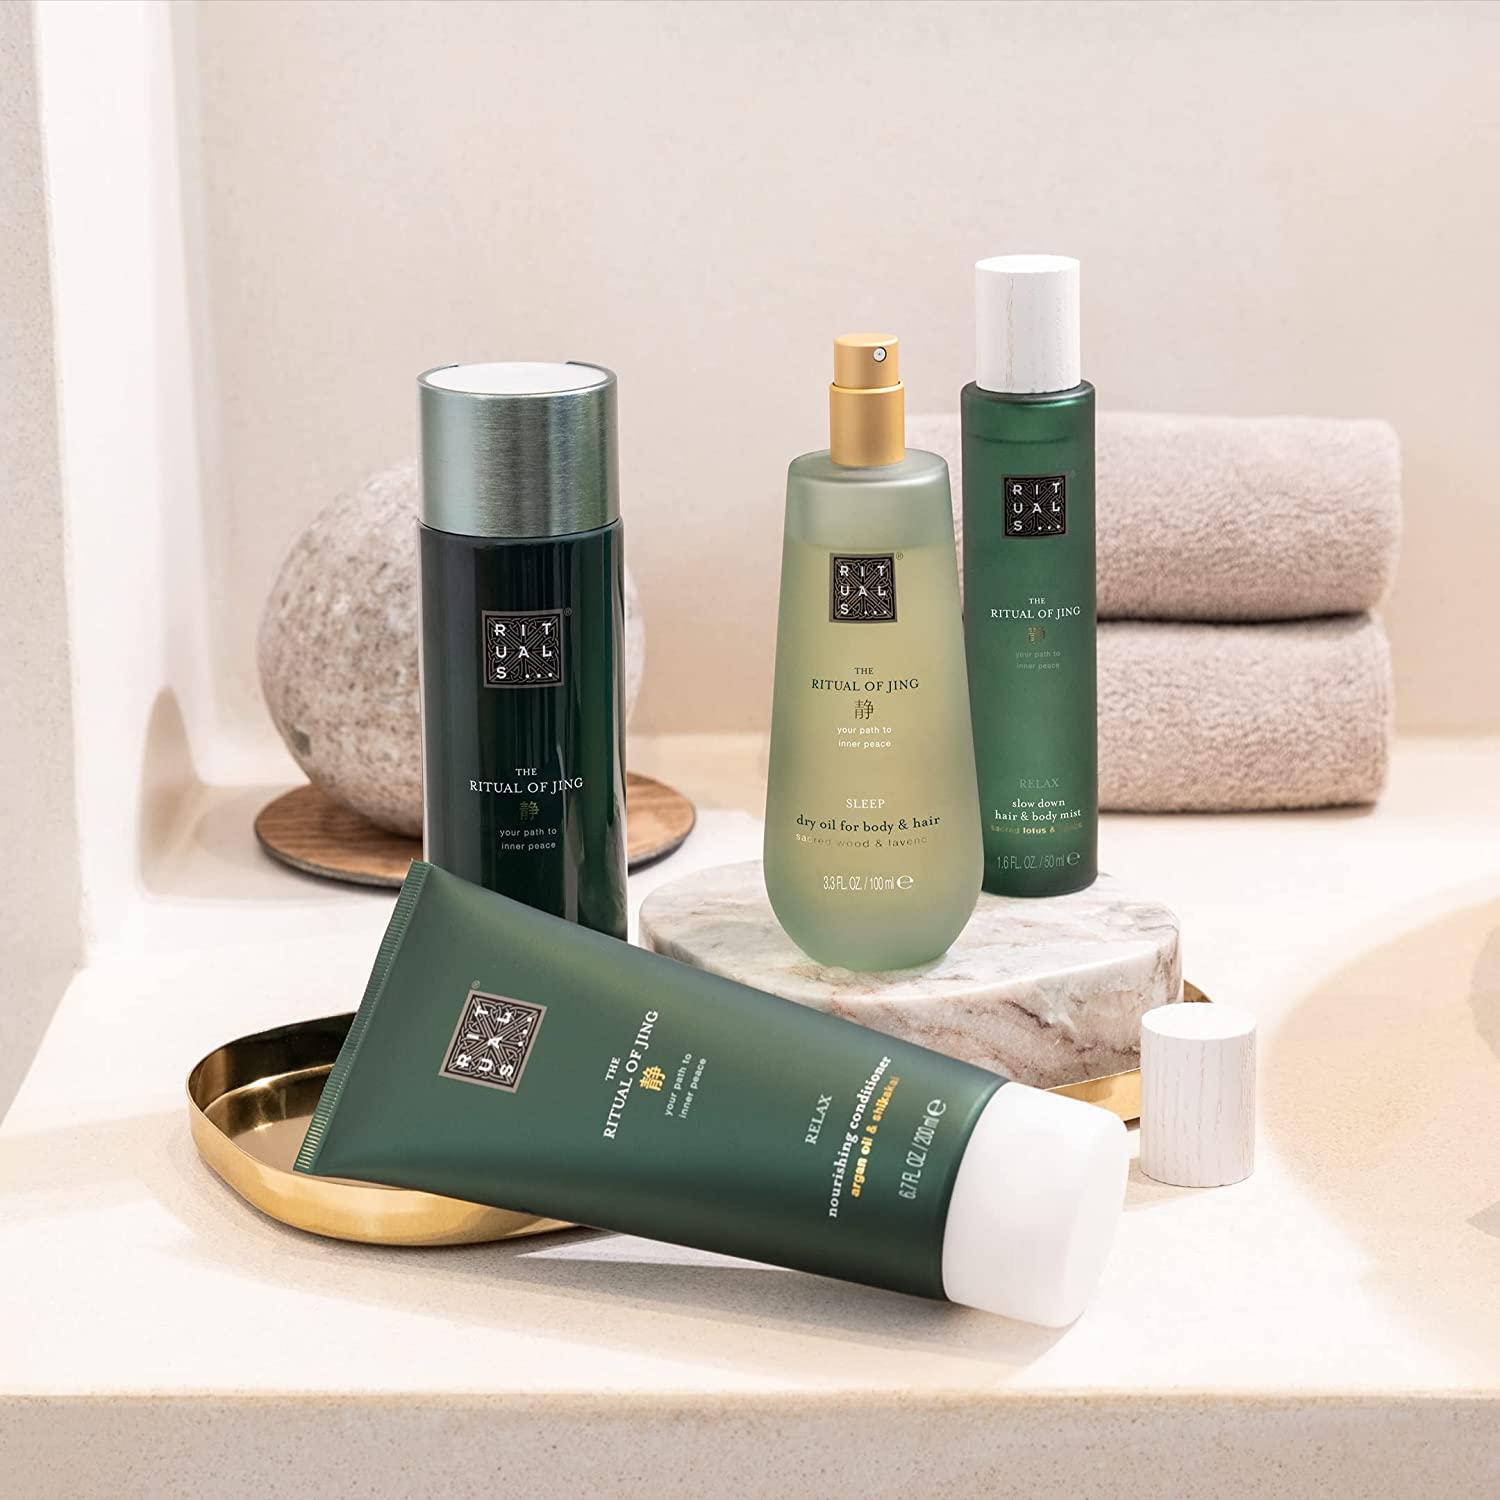 The Ritual of Jing - New - Products